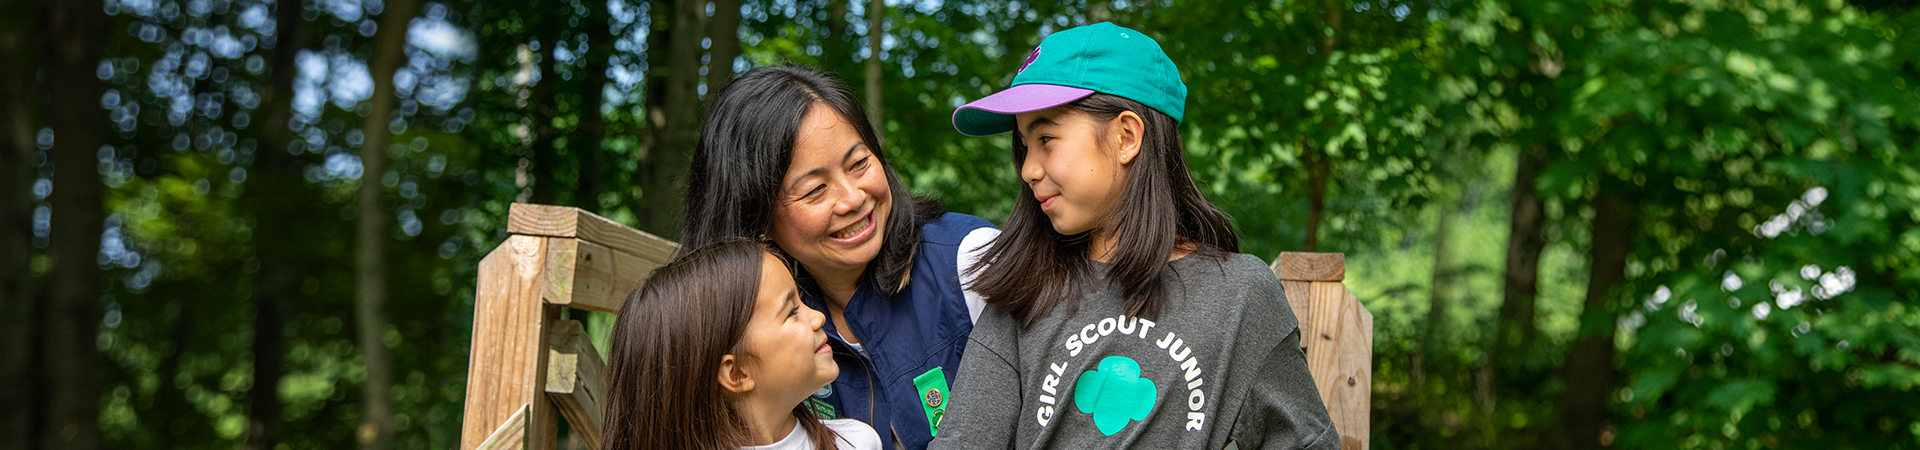  girl scout volunteer smiling at two young girl scouts 